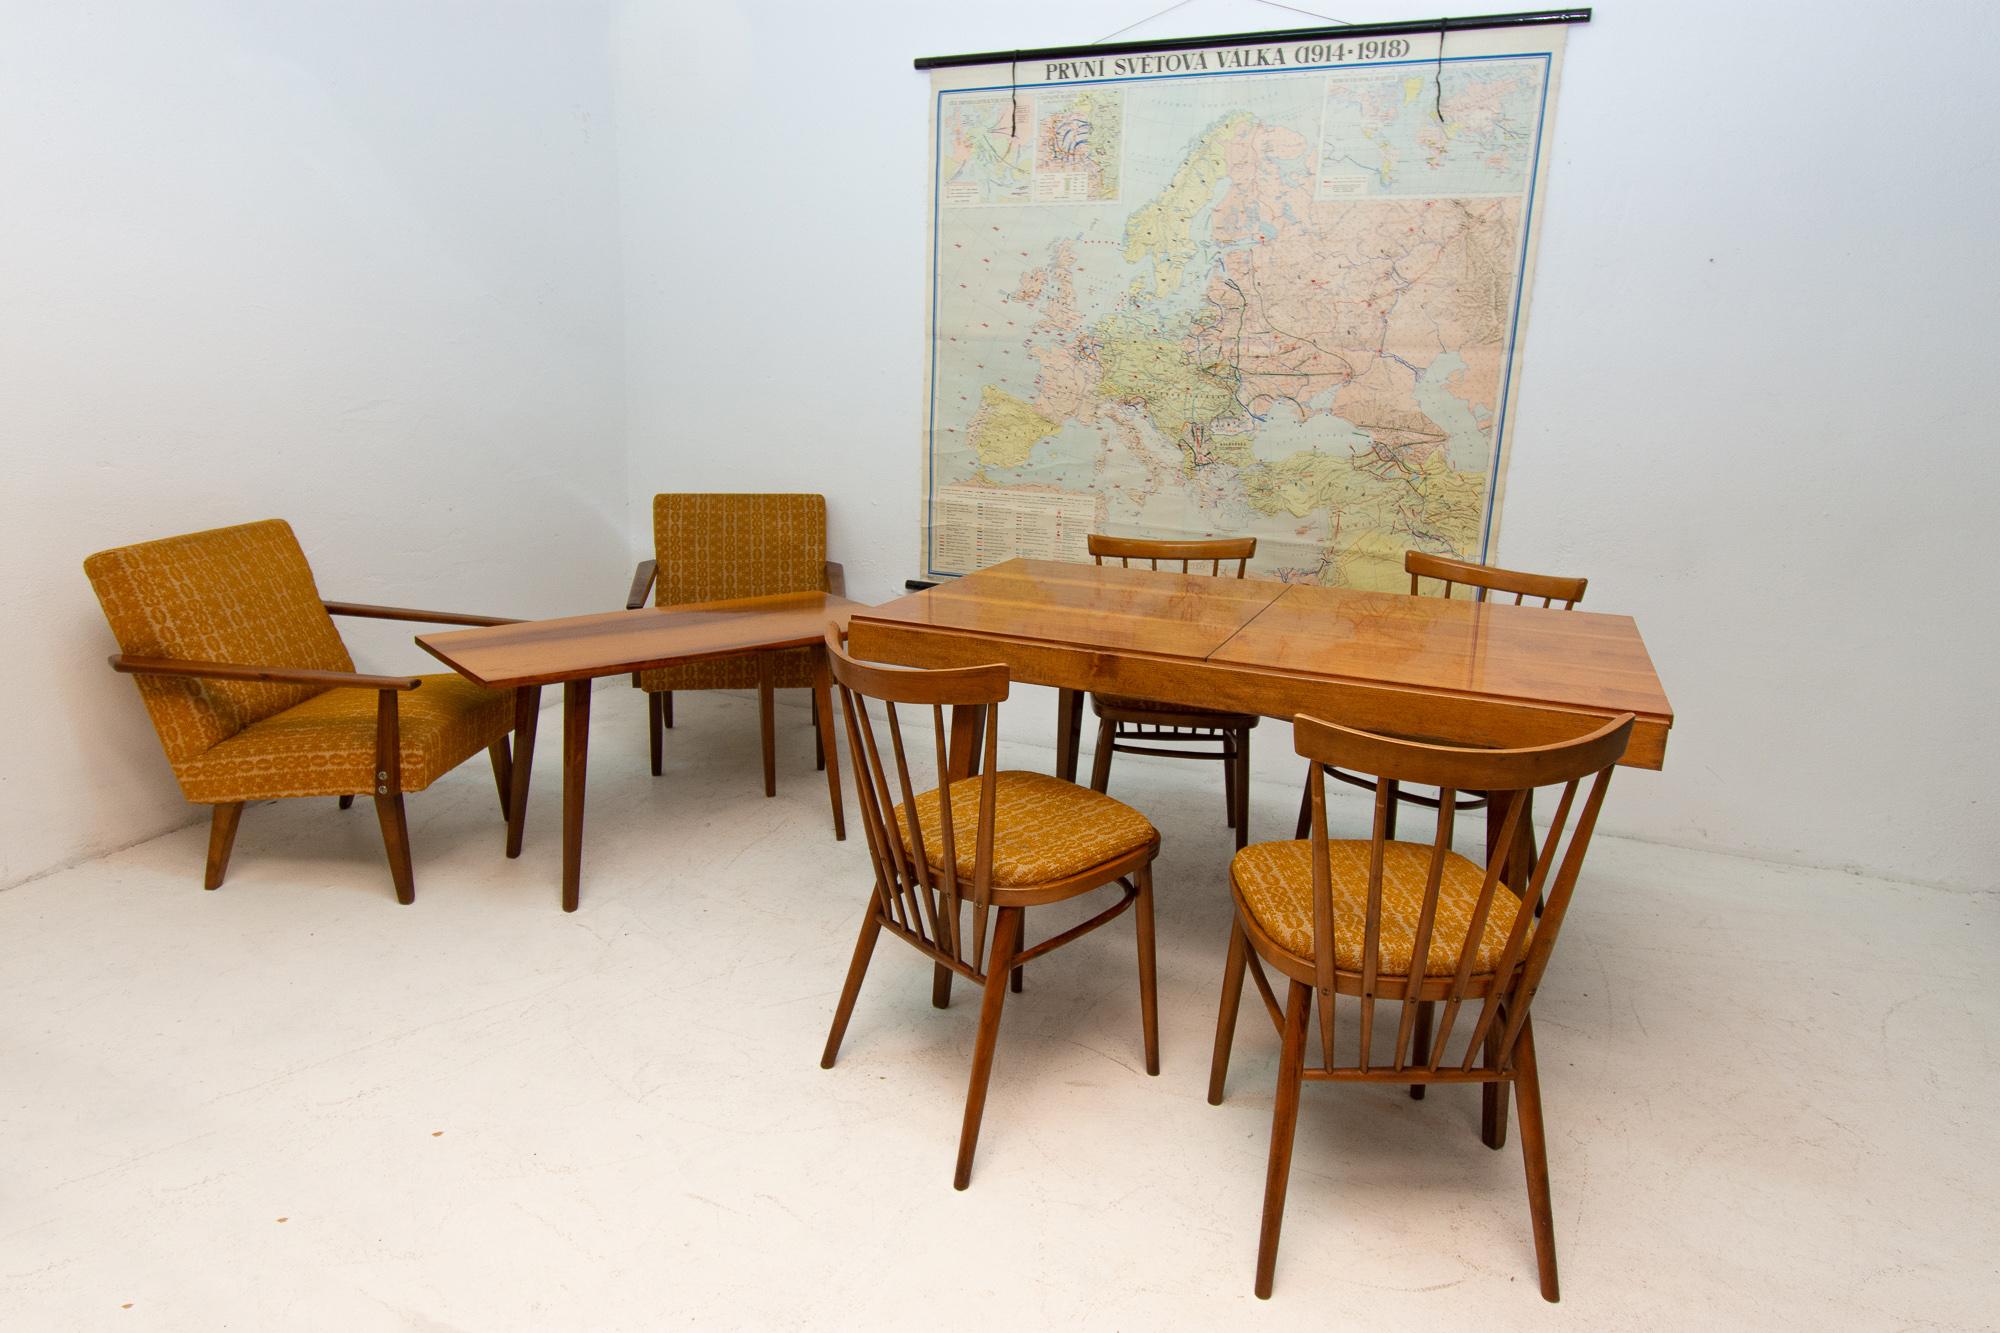 Czechoslovak dining chairs, 1960s, designed by J. Kobylka and produced by Tatra nabytok Pravenec. Very interesting shaping. In very good vintage condition. Price is for the set of four.